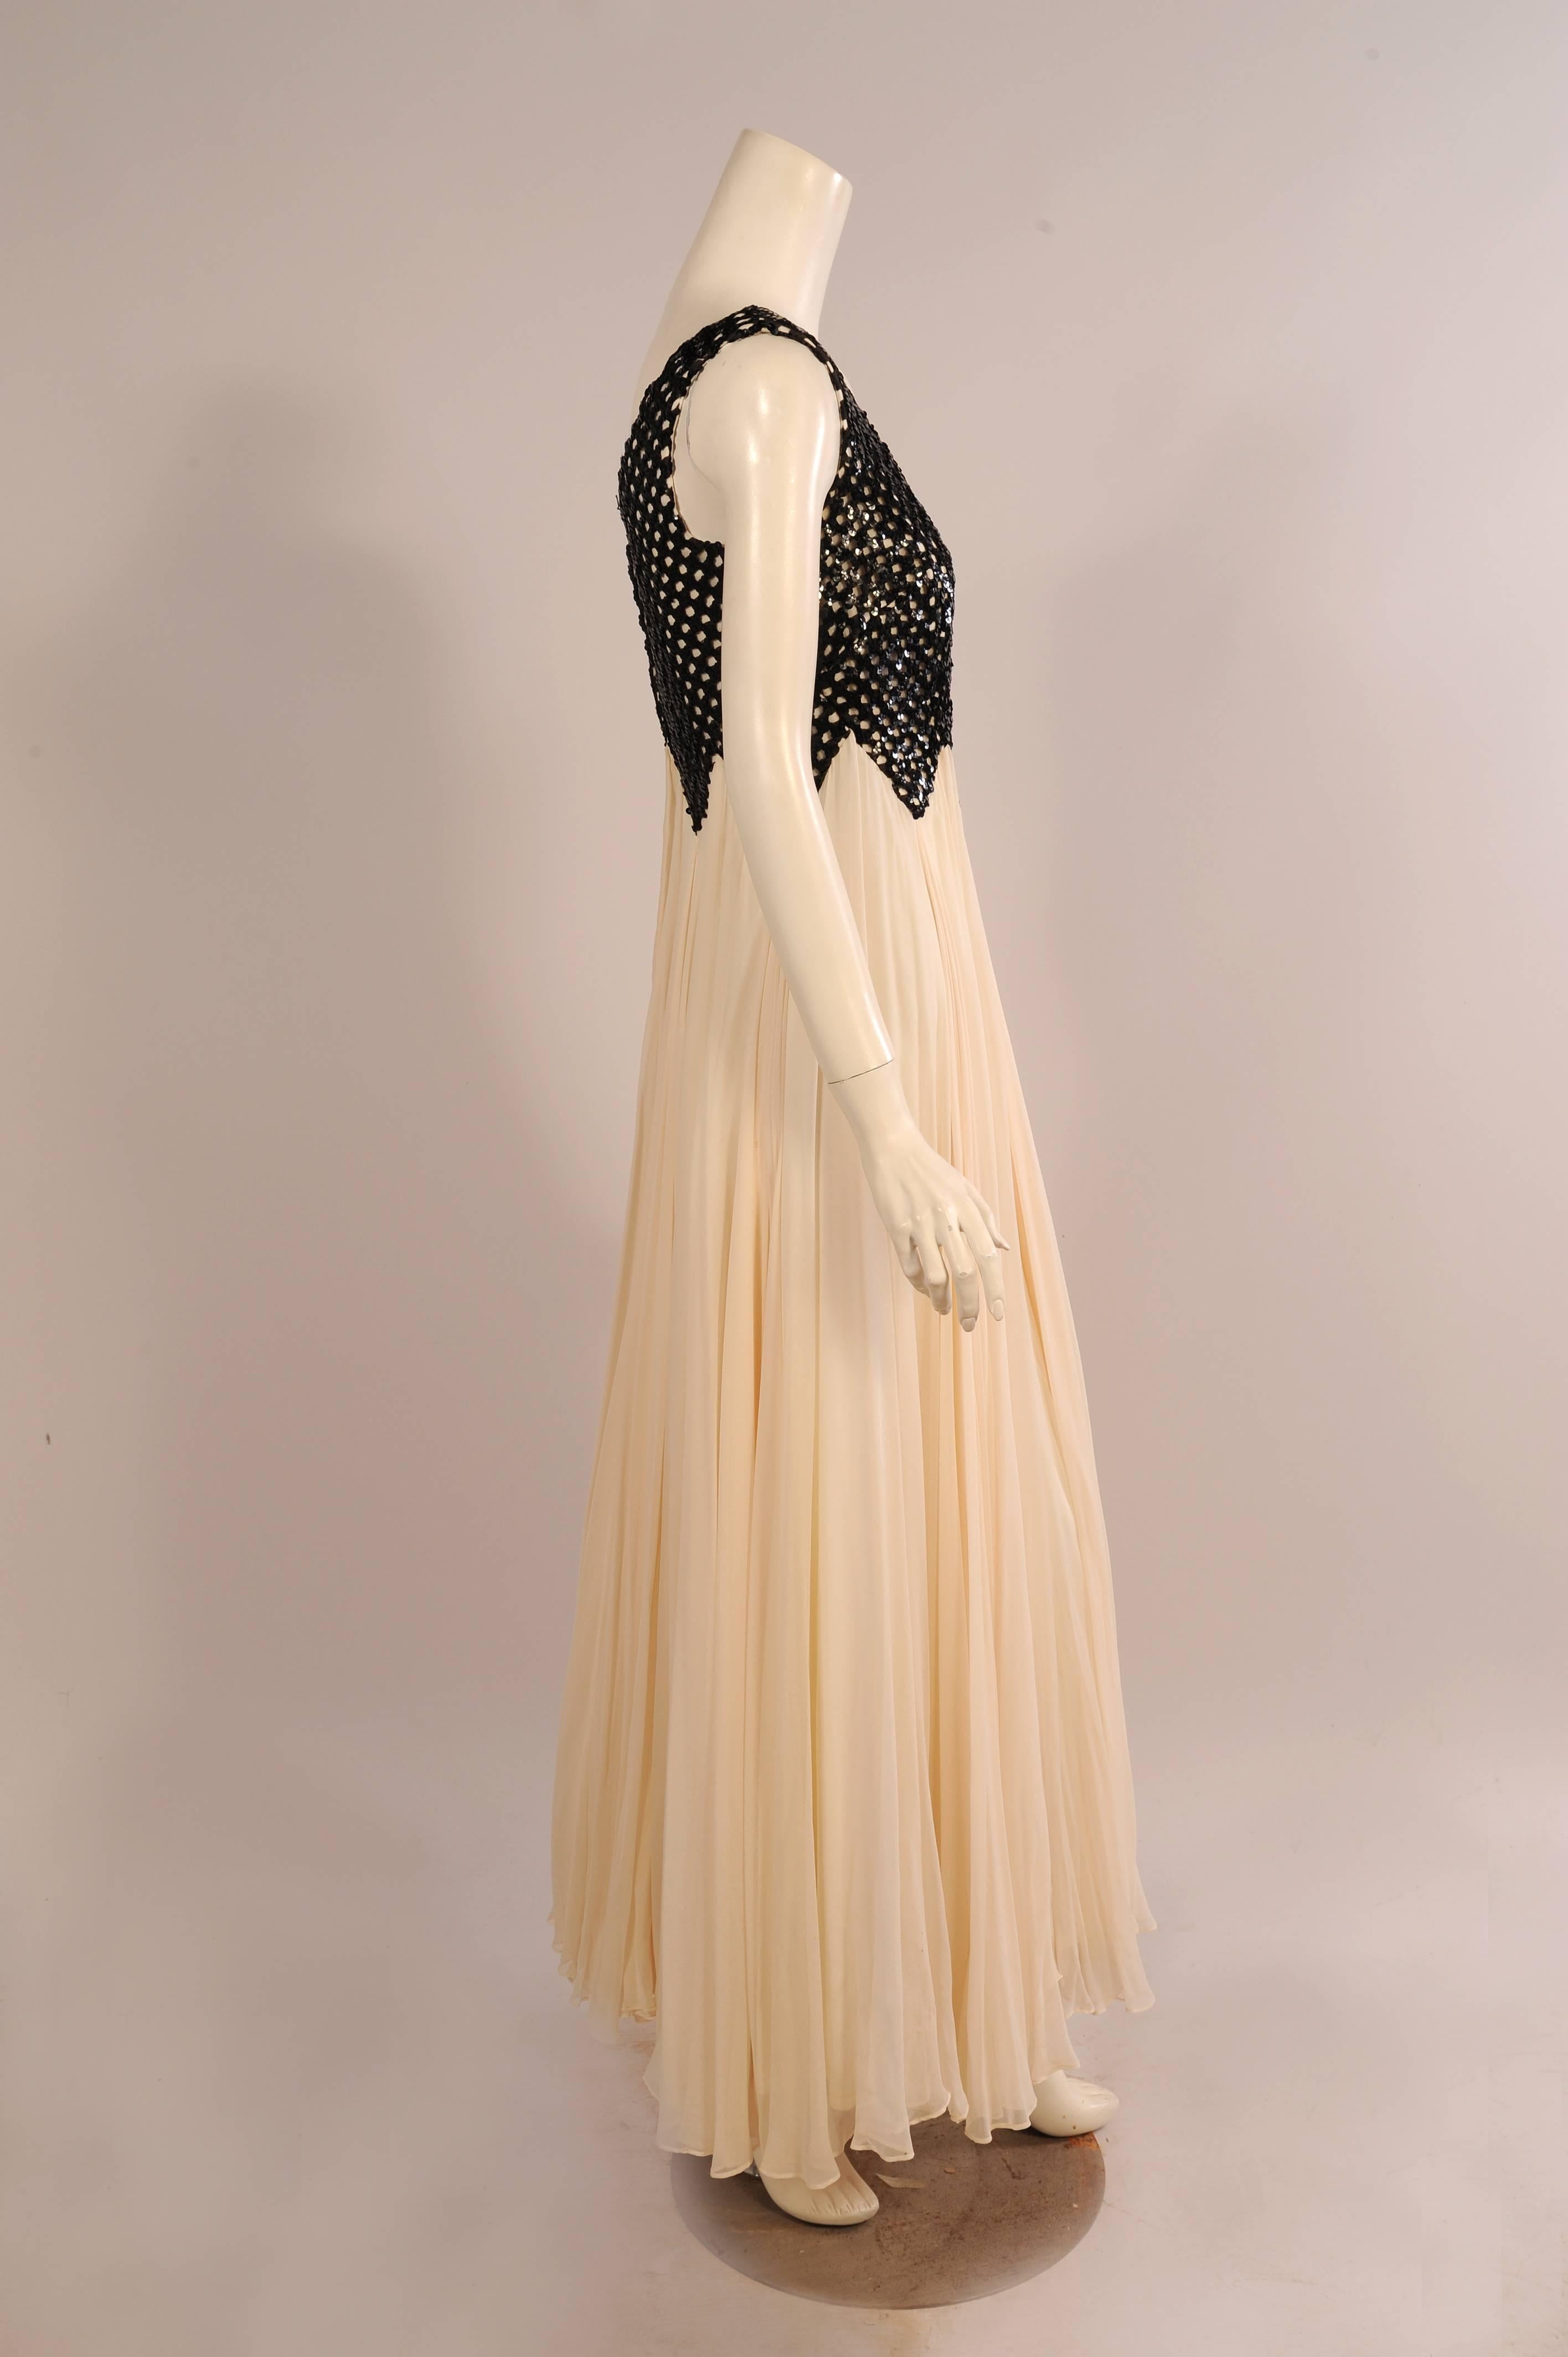 White 1960's Evening Gown Black Sequin Lattice Work Bodice over an Ivory Chiffon Skirt